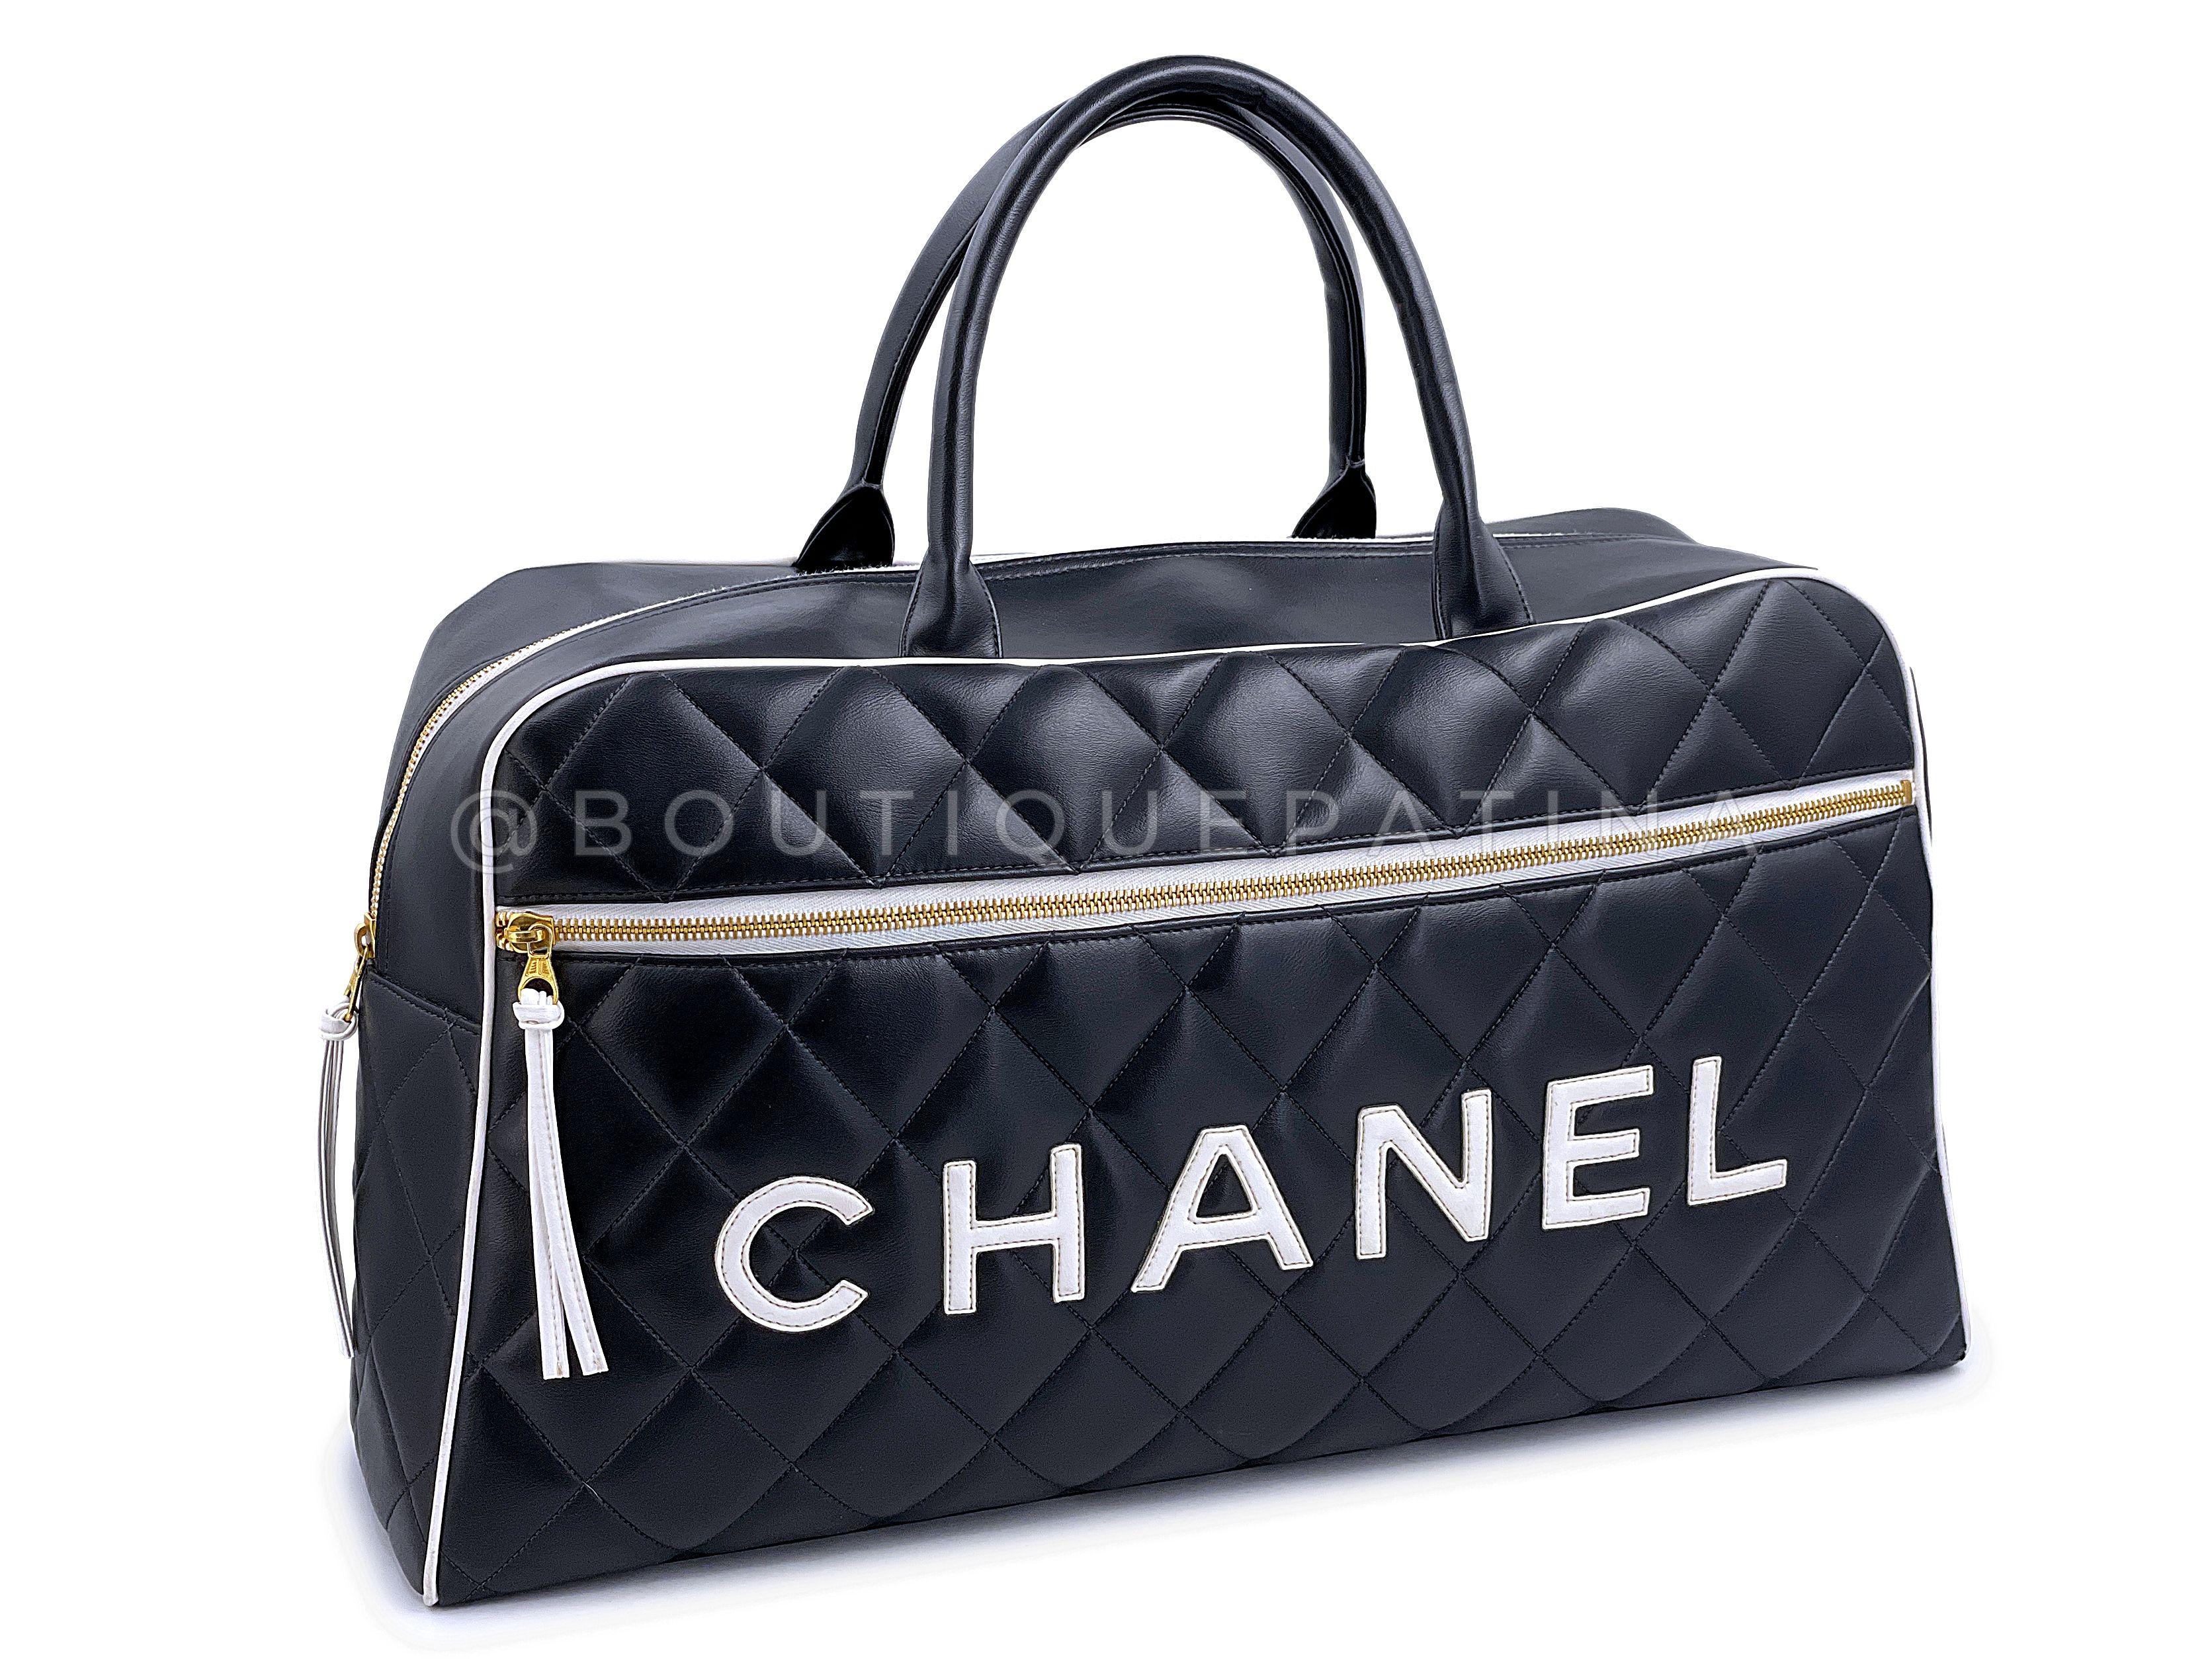 Store item: 67789
Chic and modern yet very vintage is this Chanel Letter Logo Large Bowler Duffle Bag from 1995.

It's a large travel weekender bag with front exterior zipper pocket, black leather interior with side pockets and two rolled handles